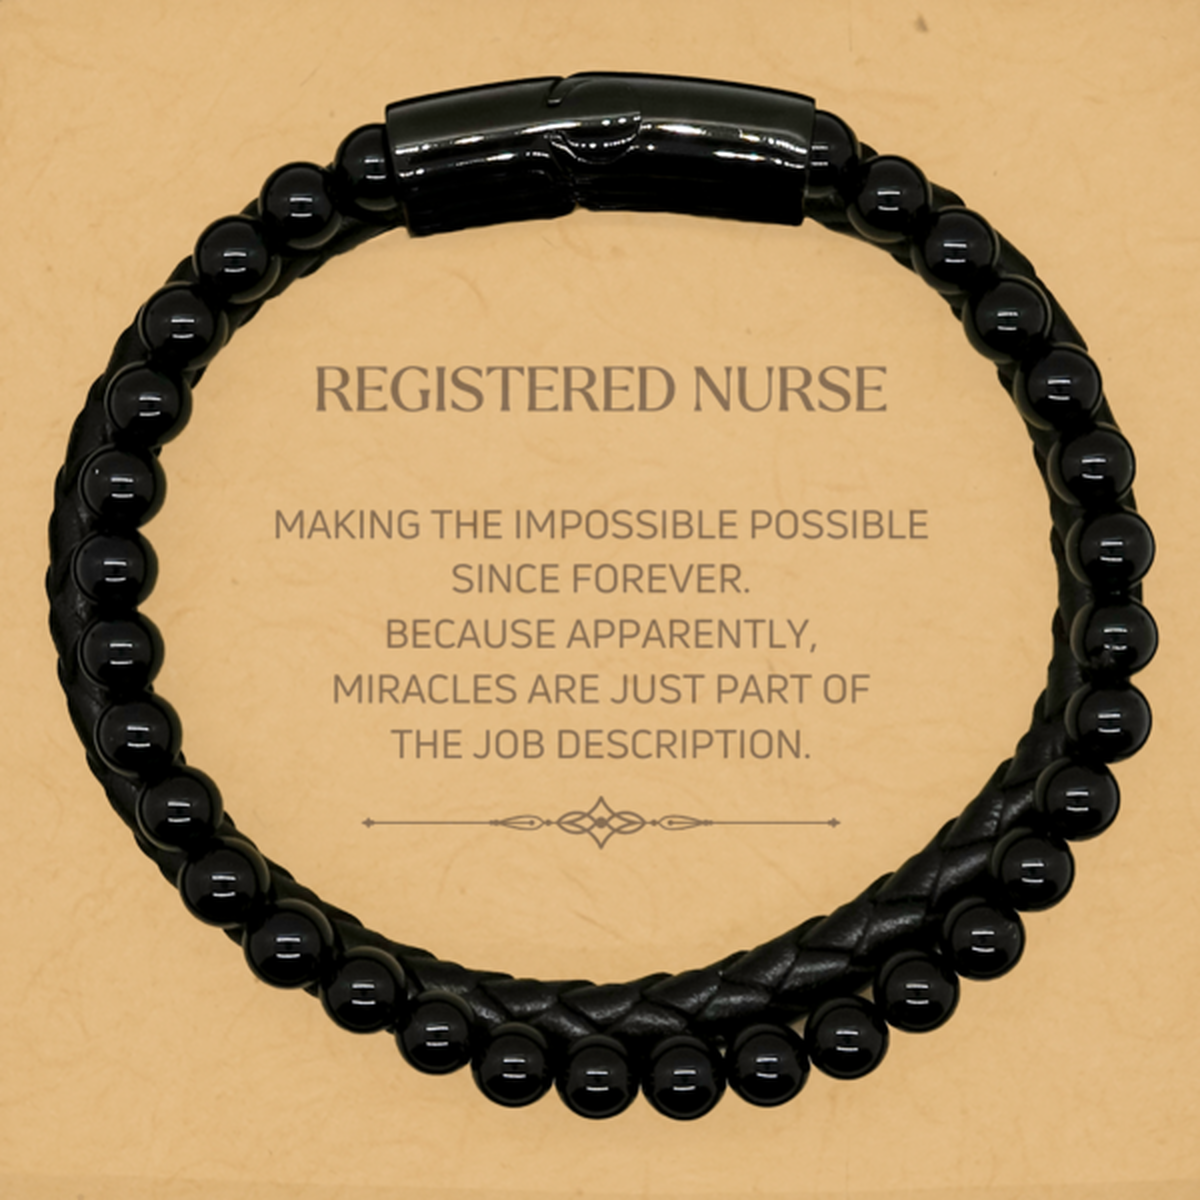 Funny Registered Nurse Gifts, Miracles are just part of the job description, Inspirational Birthday Stone Leather Bracelets For Registered Nurse, Men, Women, Coworkers, Friends, Boss